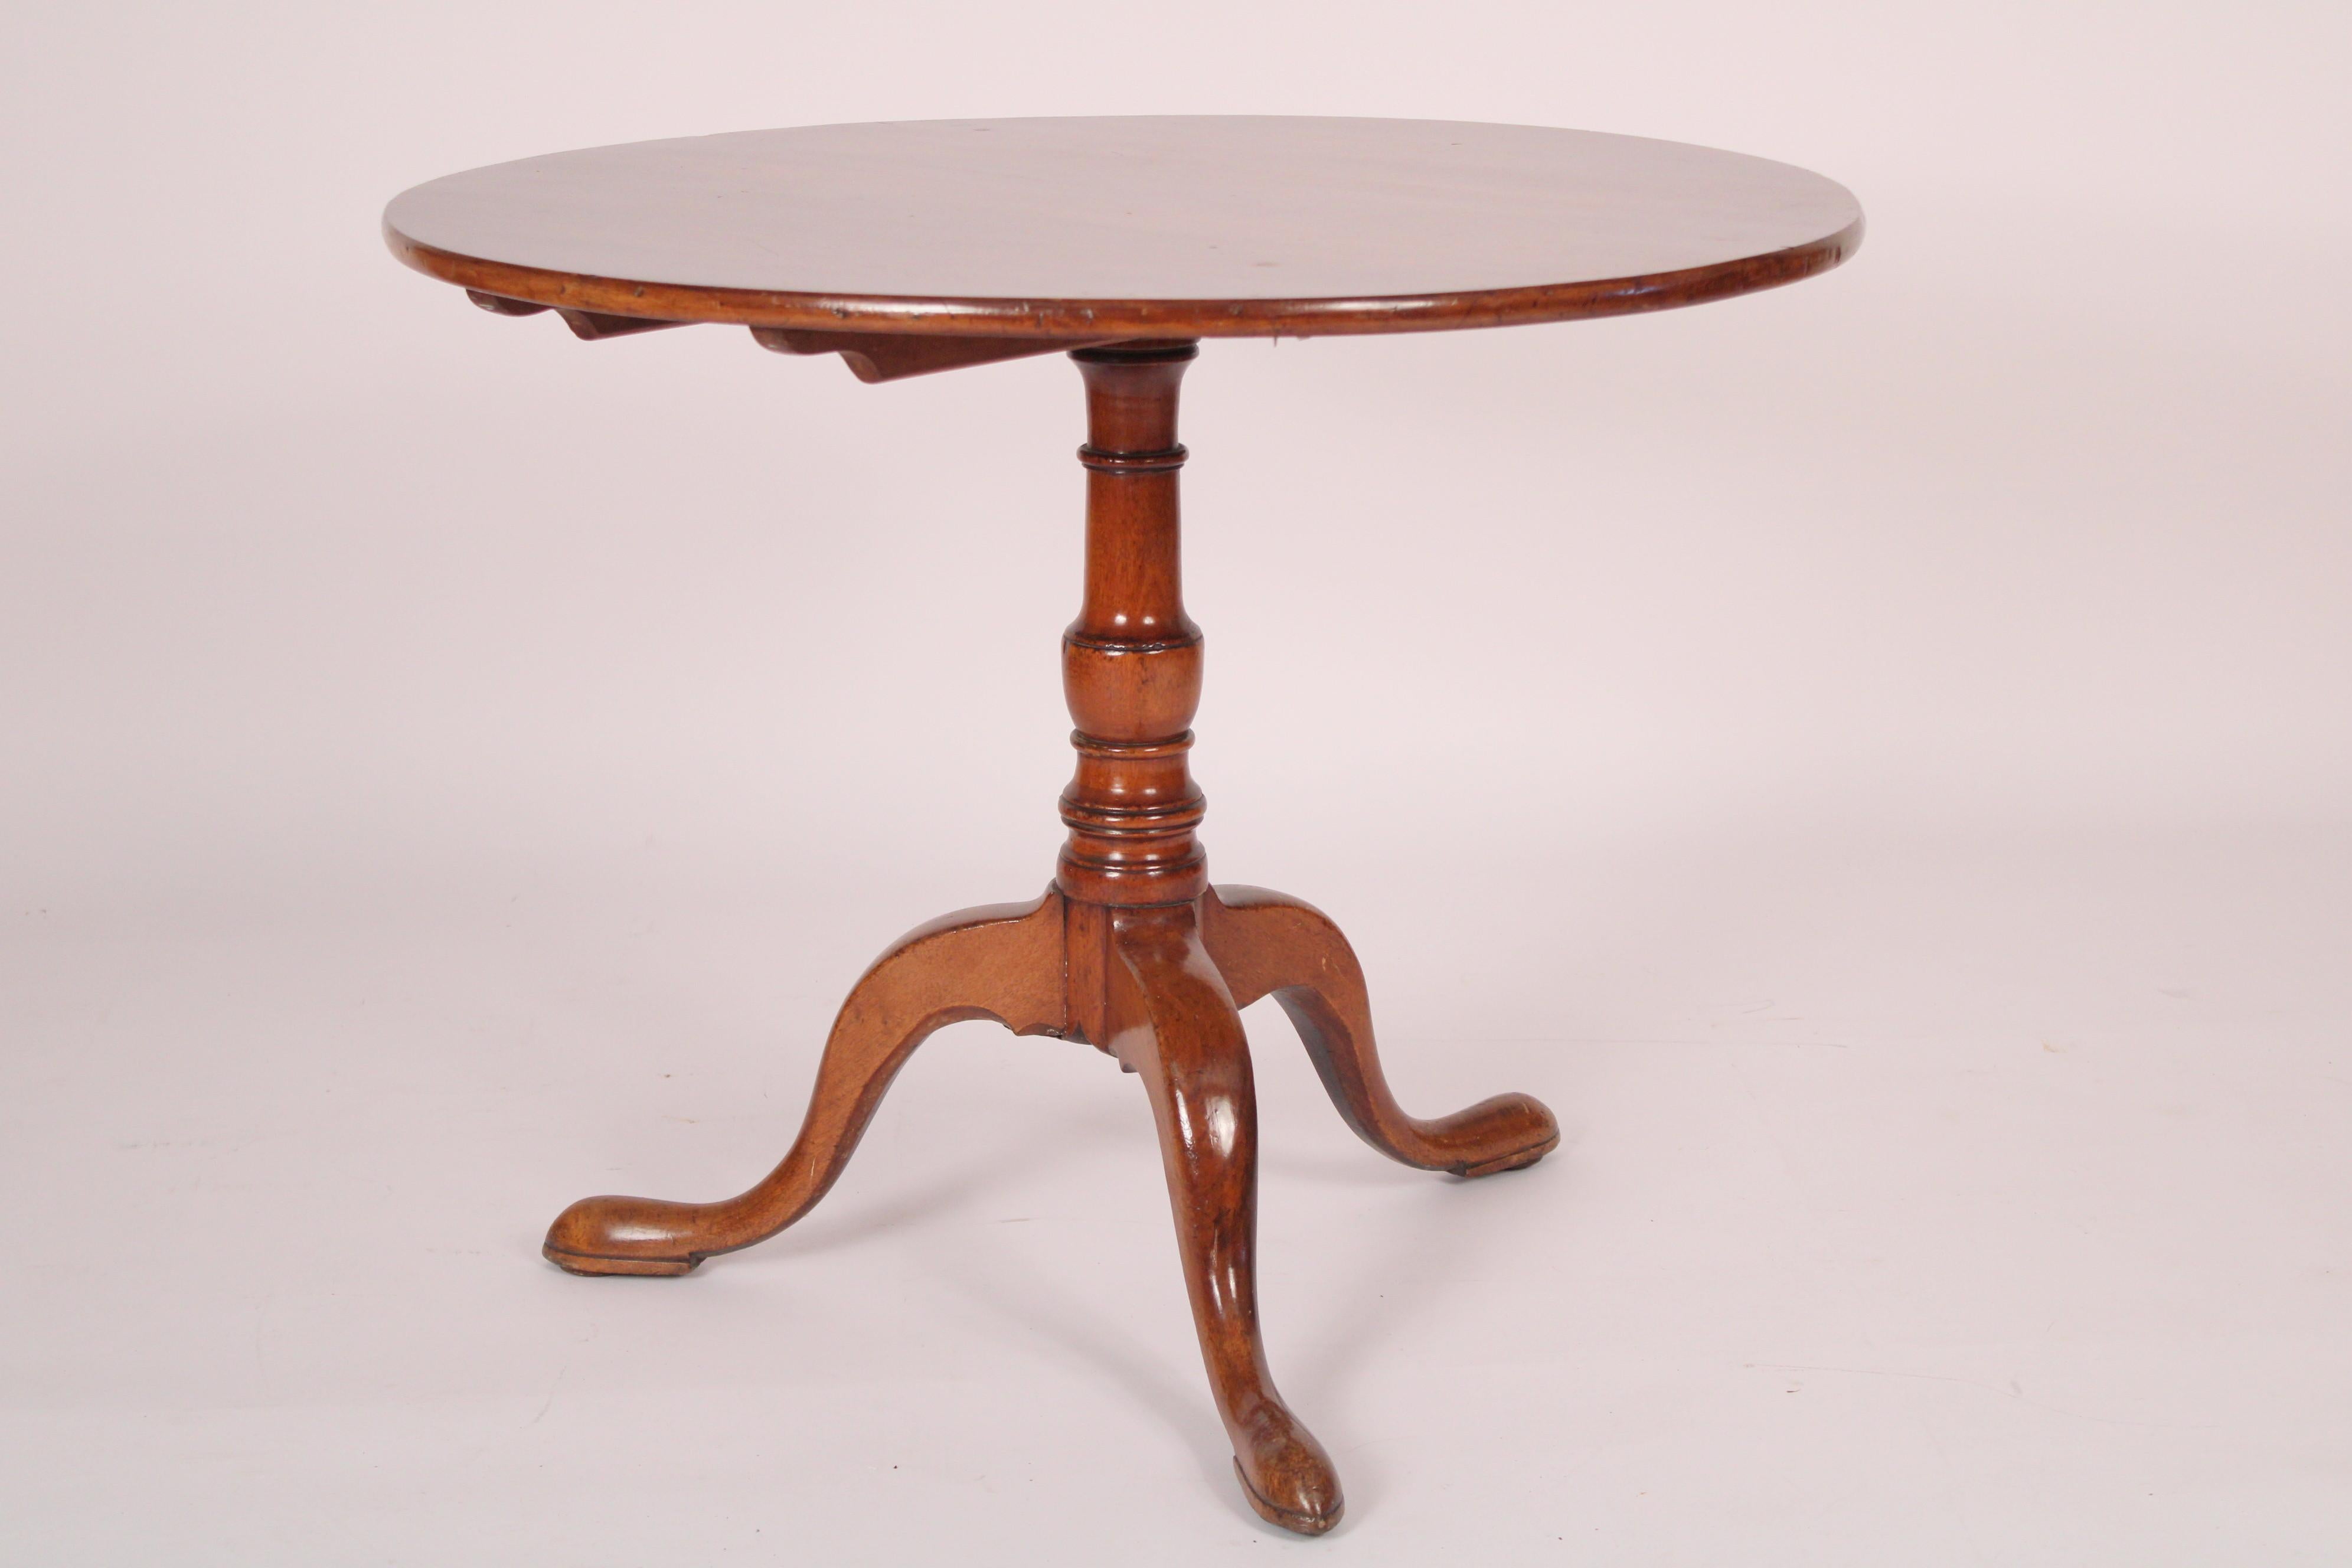 George III mahogany tilt top table with a single board top, late 18th century. With a 35